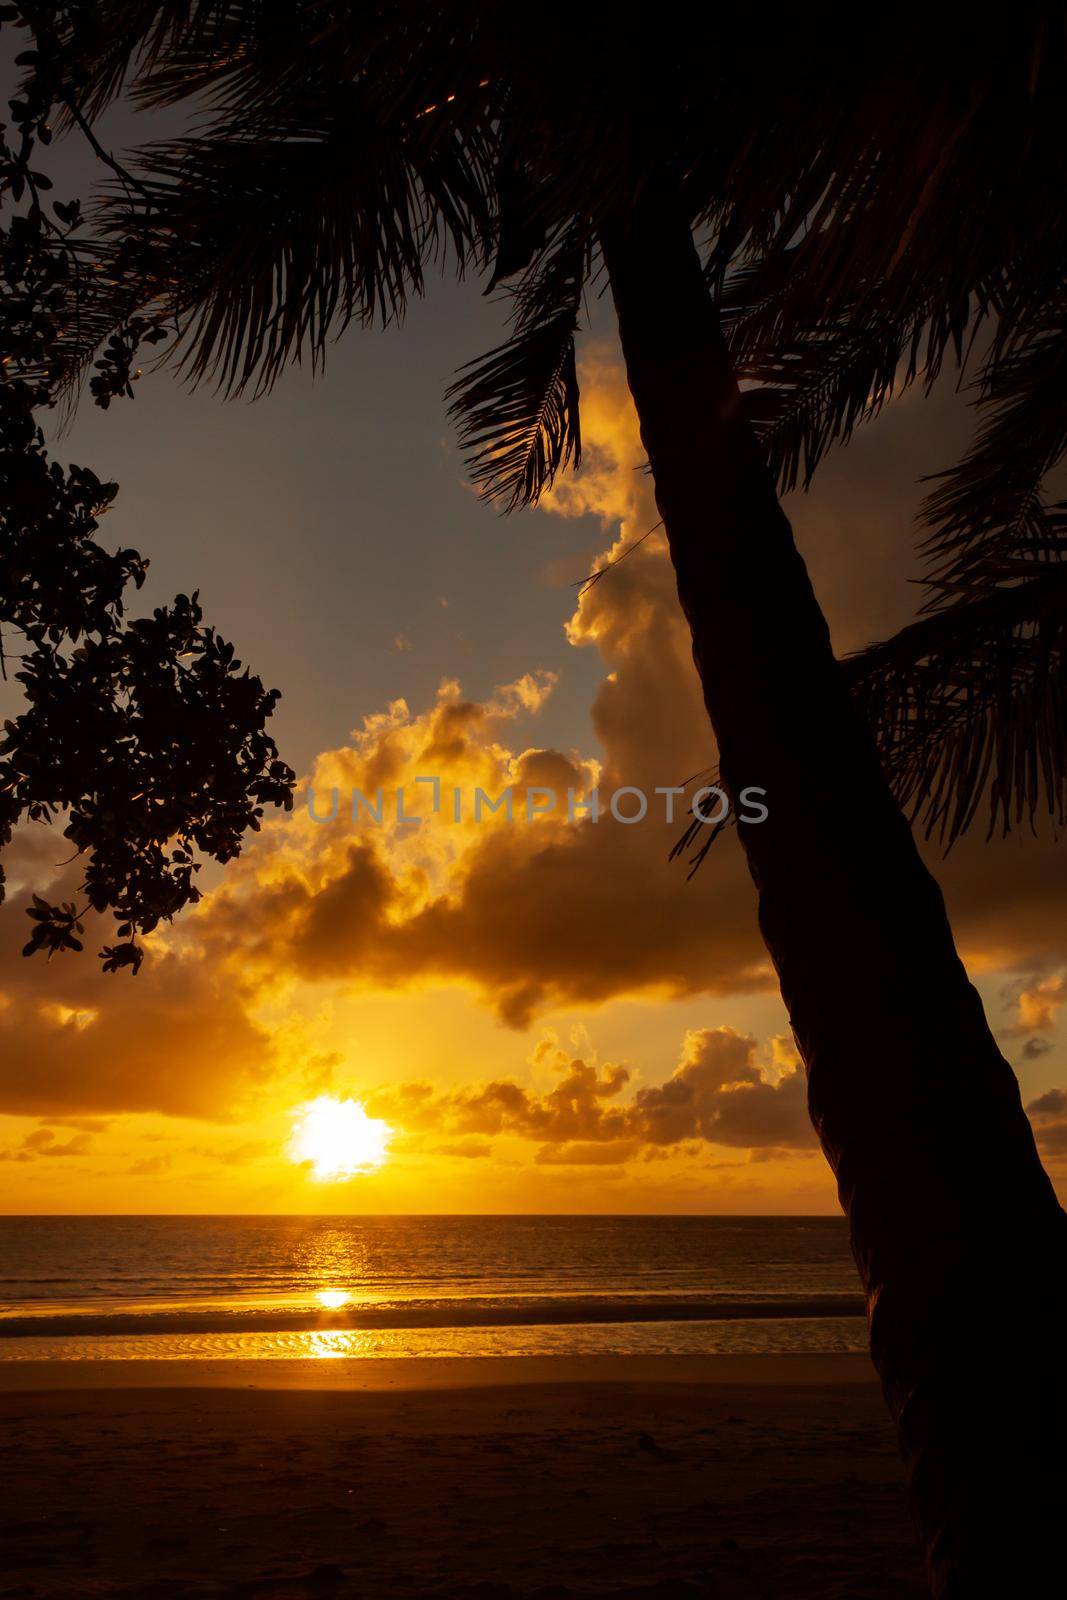 Sonnenaufgang in Cape Tributation - Australien by bettercallcurry